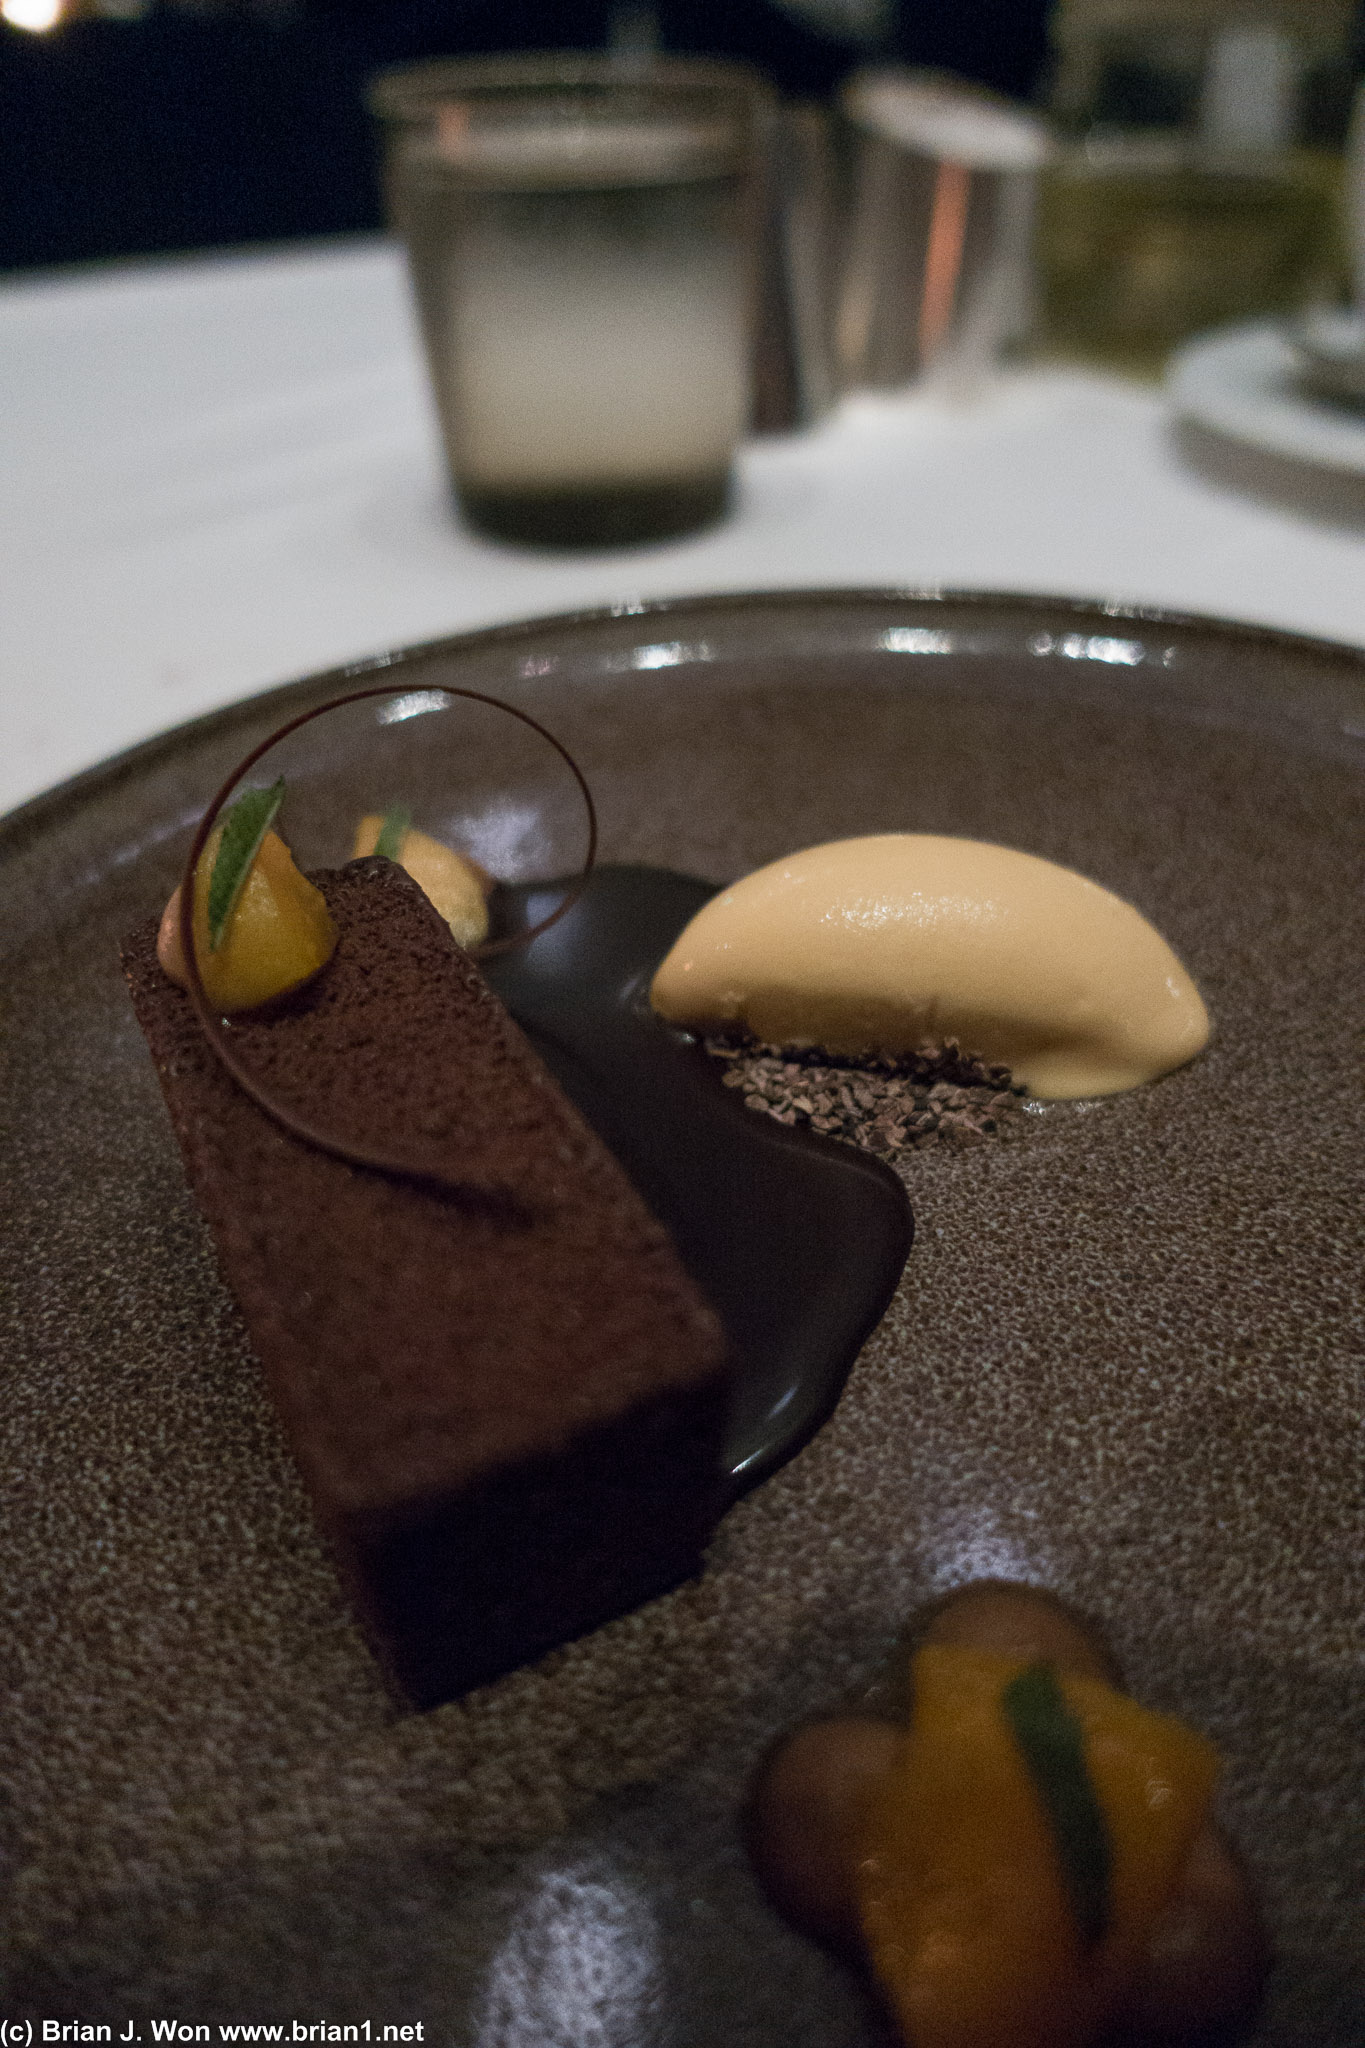 70% dark chocolate, lots of apricot in the sauce, the ice cream, the ganache.